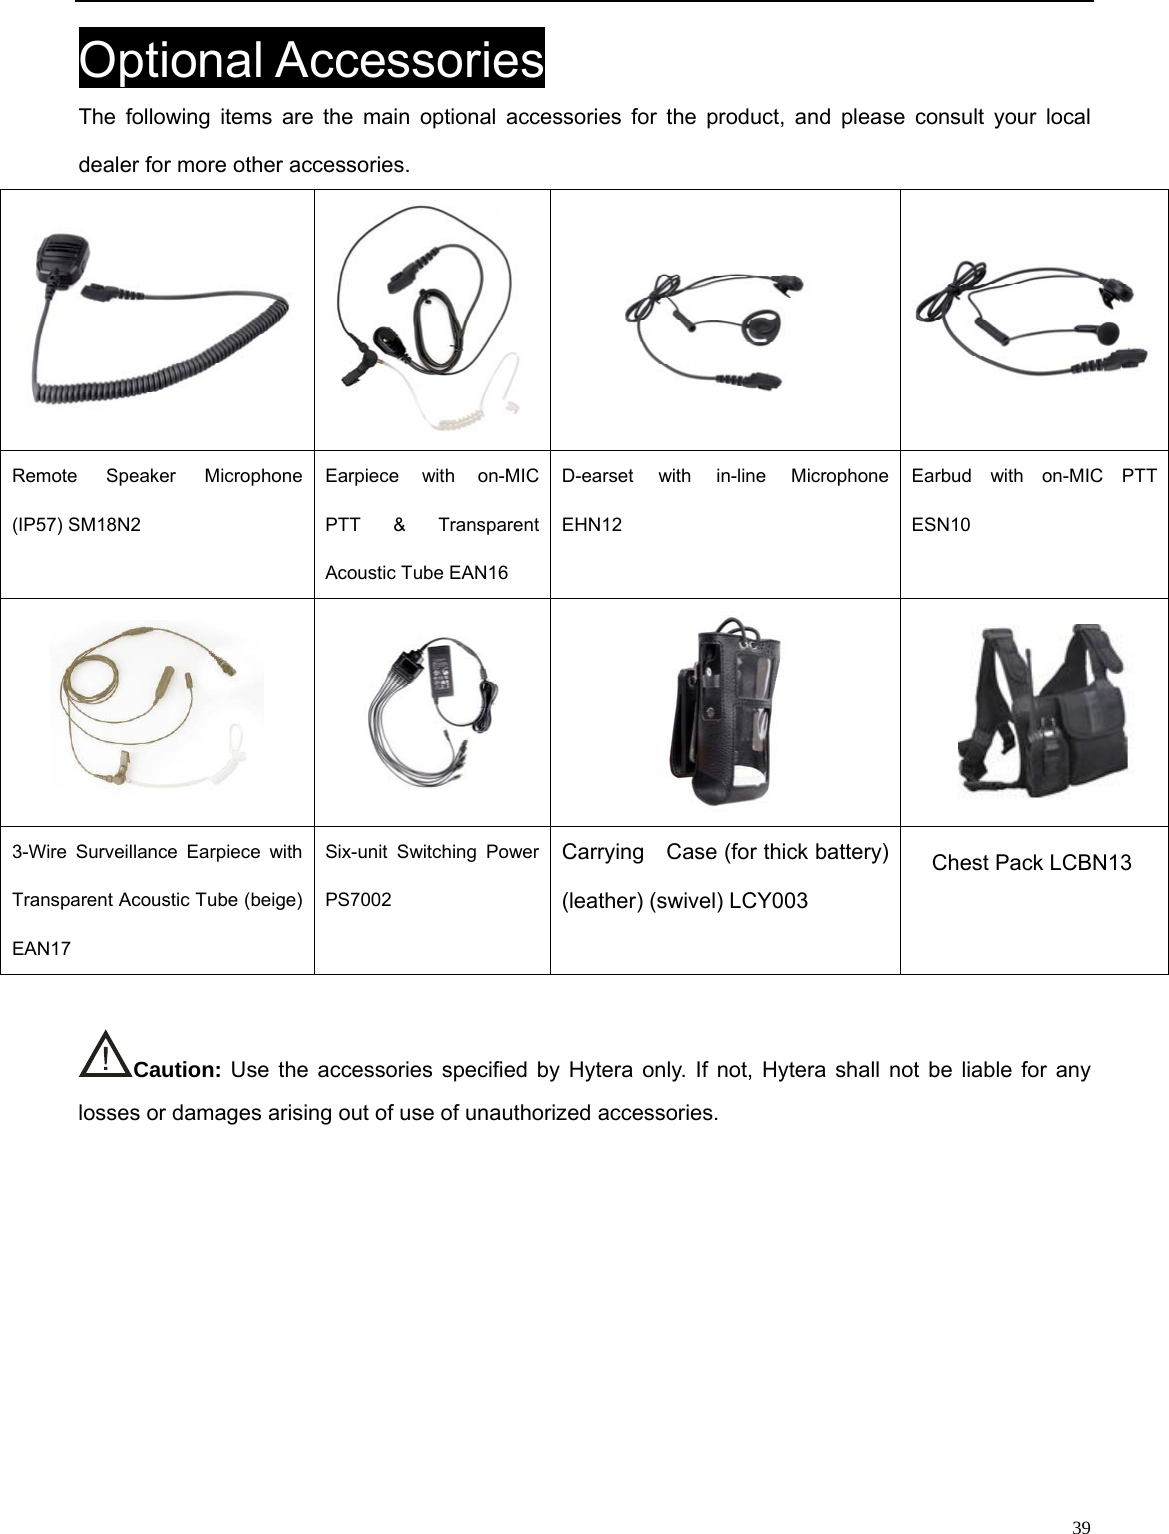                                                                                                            Optional Accessories The following items are the main optional accessories for the product, and please consult your local dealer for more other accessories.  Remote Speaker Microphone (IP57) SM18N2   Earpiece with on-MIC PTT &amp; Transparent Acoustic Tube EAN16   D-earset with in-line Microphone EHN12 Earbud with on-MIC PTT ESN10        Carrying    Case (for thick battery) (leather) (swivel) LCY003 3-Wire Surveillance Earpiece with Transparent Acoustic Tube (beige) EAN17 Six-unit Switching Power PS7002    Caution: Use the accessories specified by Hytera only. If not, Hytera shall not be liable for any losses or damages arising out of use of unauthorized accessories.               39 Chest Pack LCBN13 